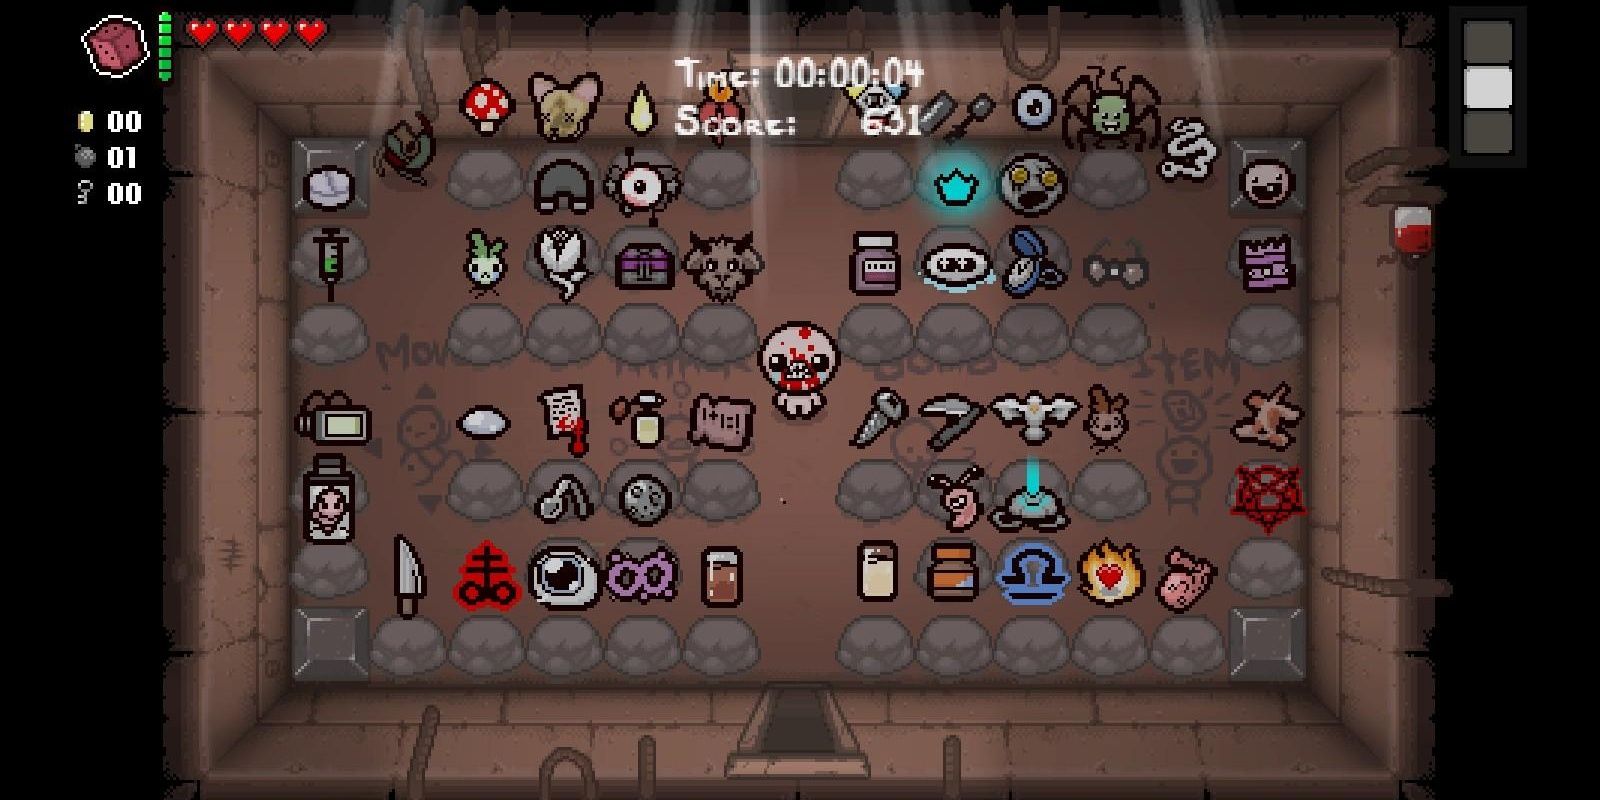 Extremely Overpowered Start mod for The Binding of Isaac